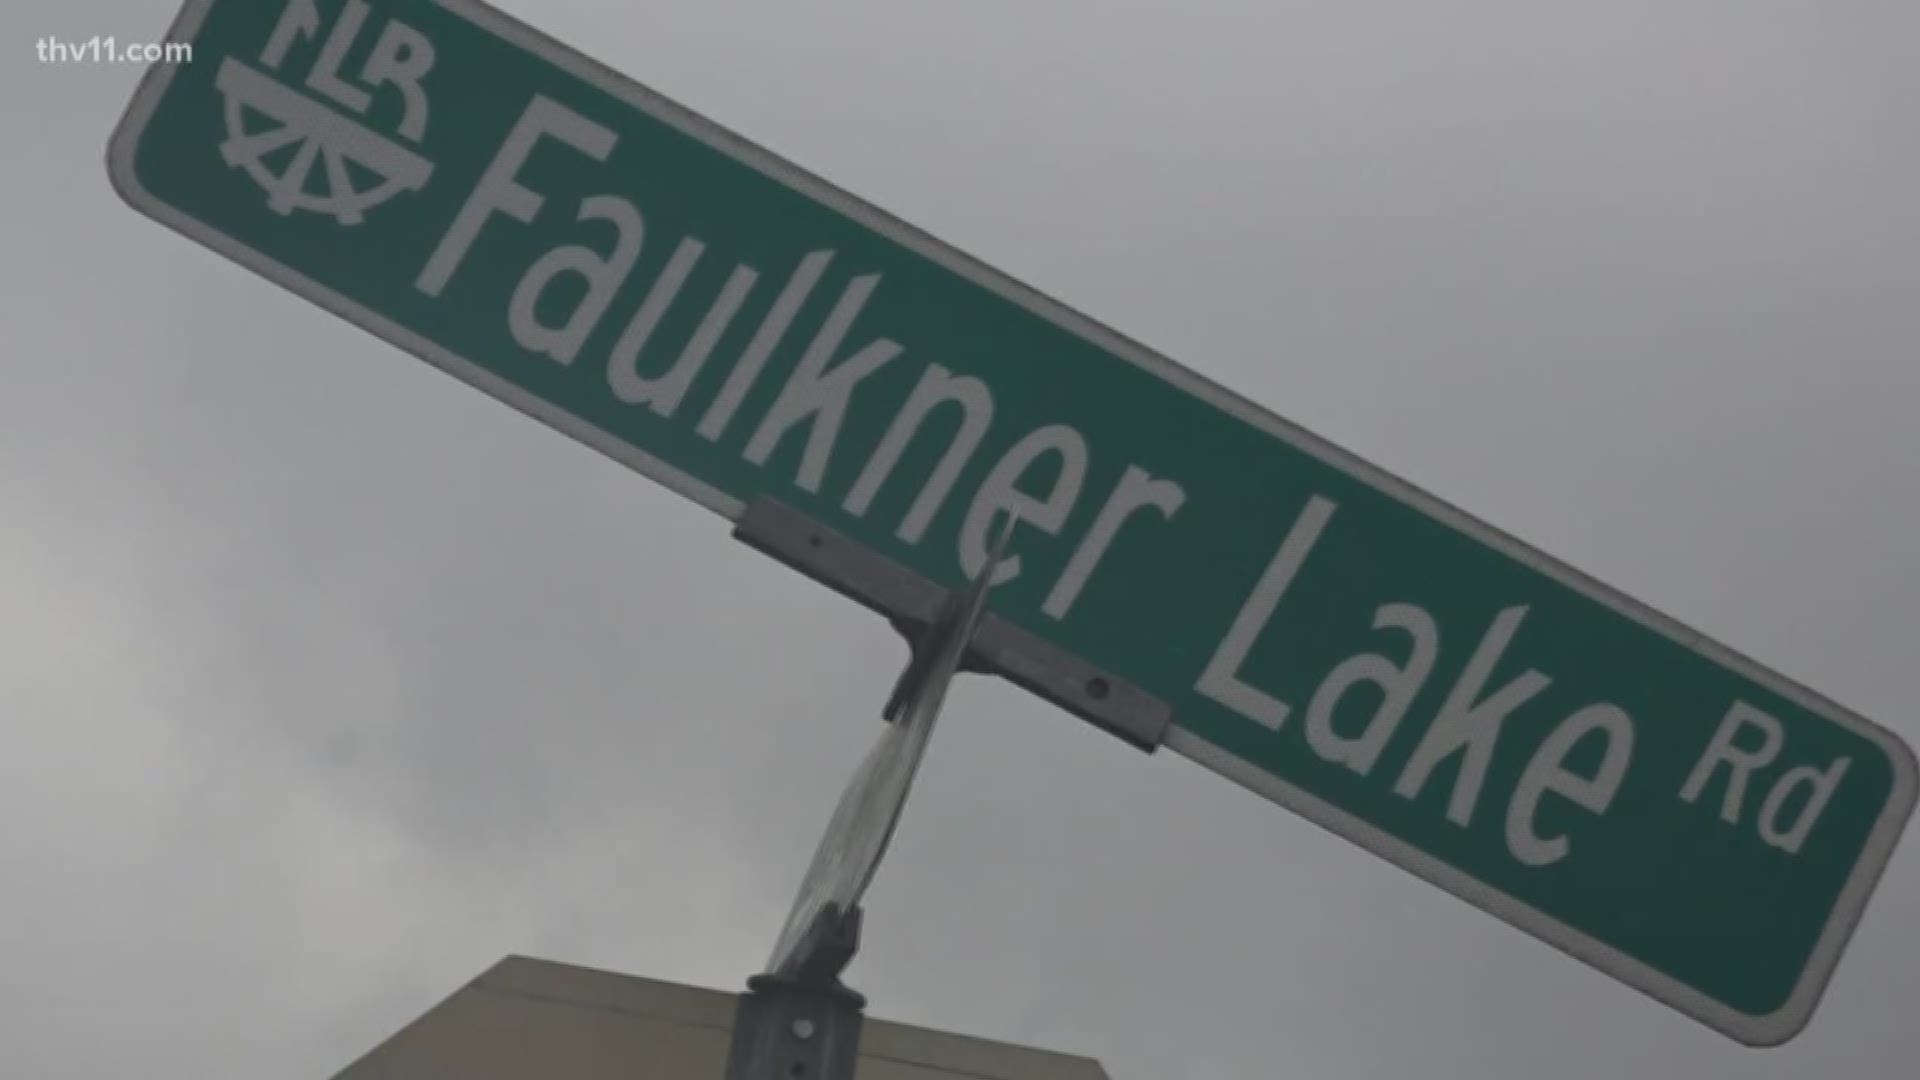 When it rains, it pours for people traveling in North Little Rock. Faulkner Lake Road is one flood prone area where drivers are fed up.